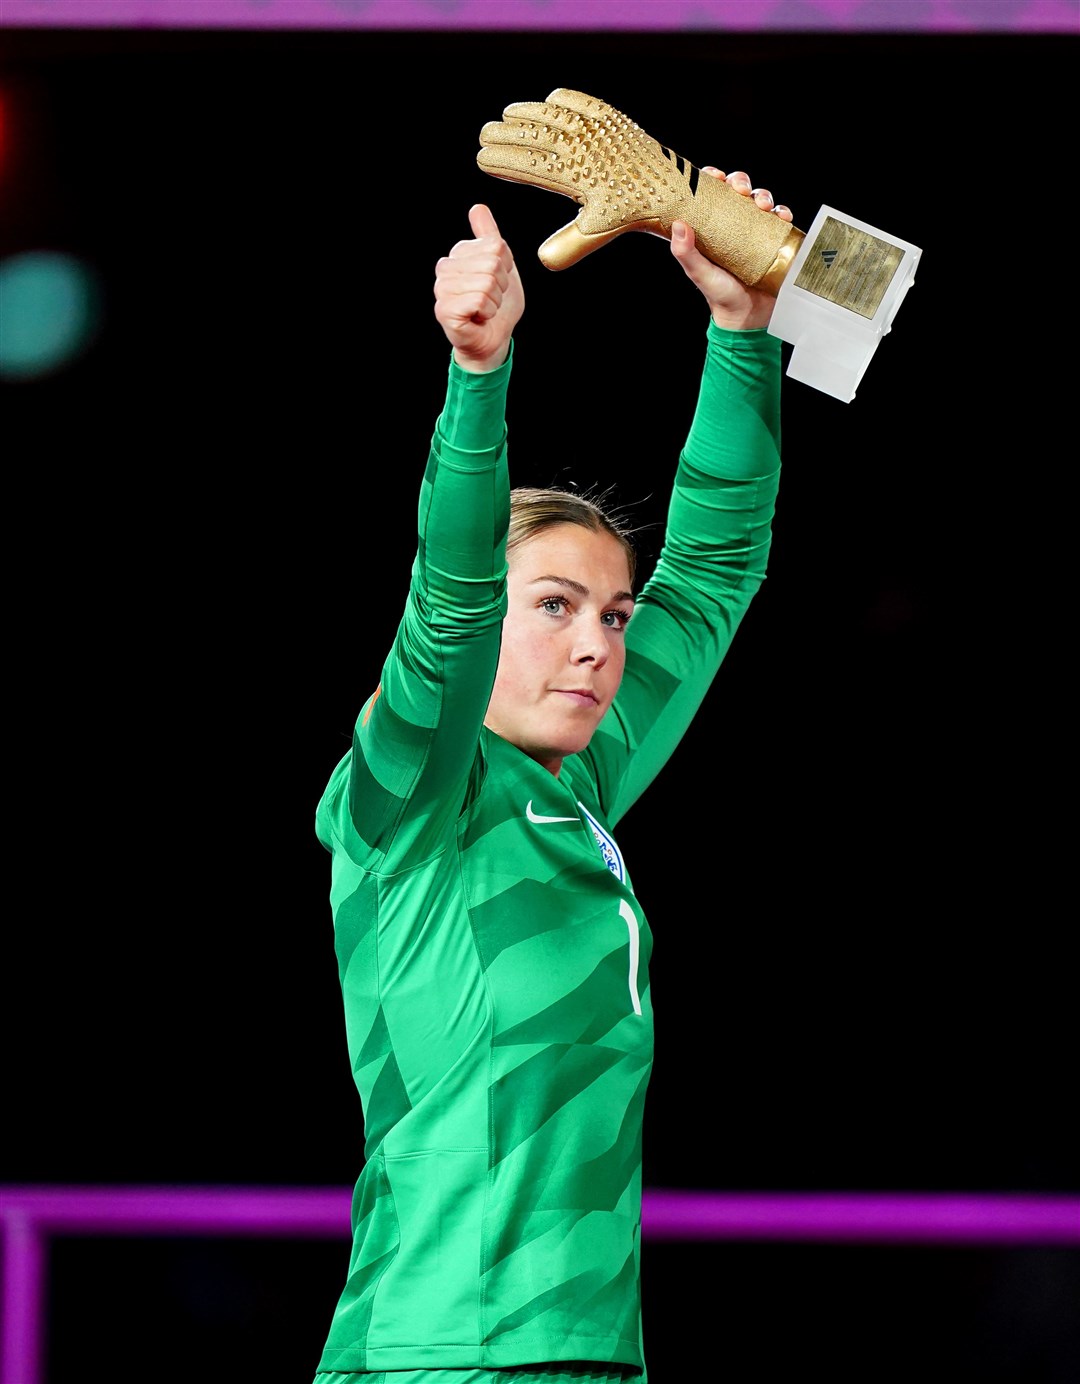 England goalkeeper Mary Earps gestures to the fans after collecting her Golden Glove award at the end of the FIFA Women’s World Cup (Zac Goodwin/PA)